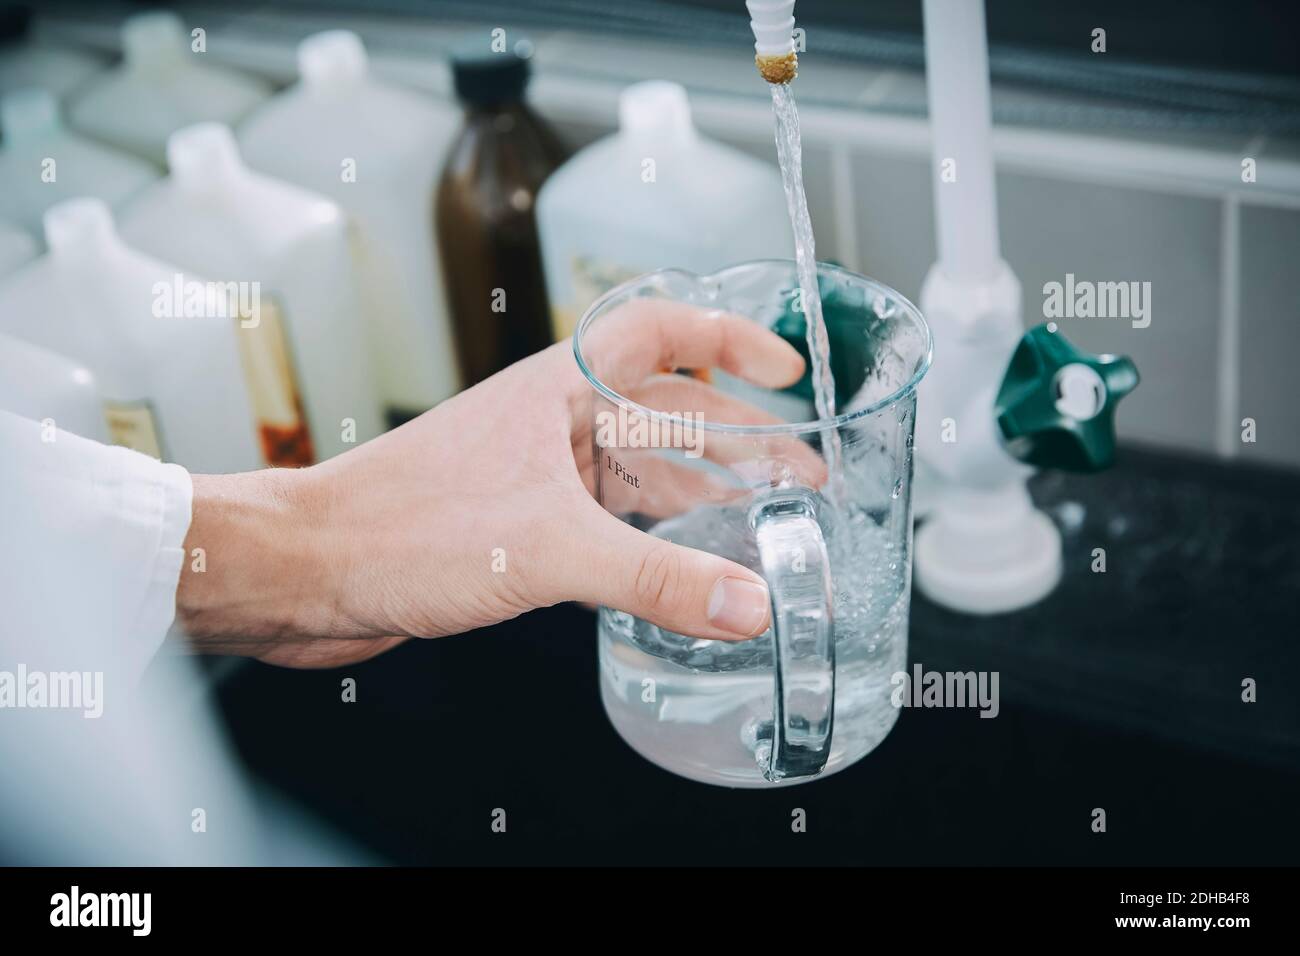 Cropped hand of female student filling beaker with liquid solution in chemistry laboratory Stock Photo